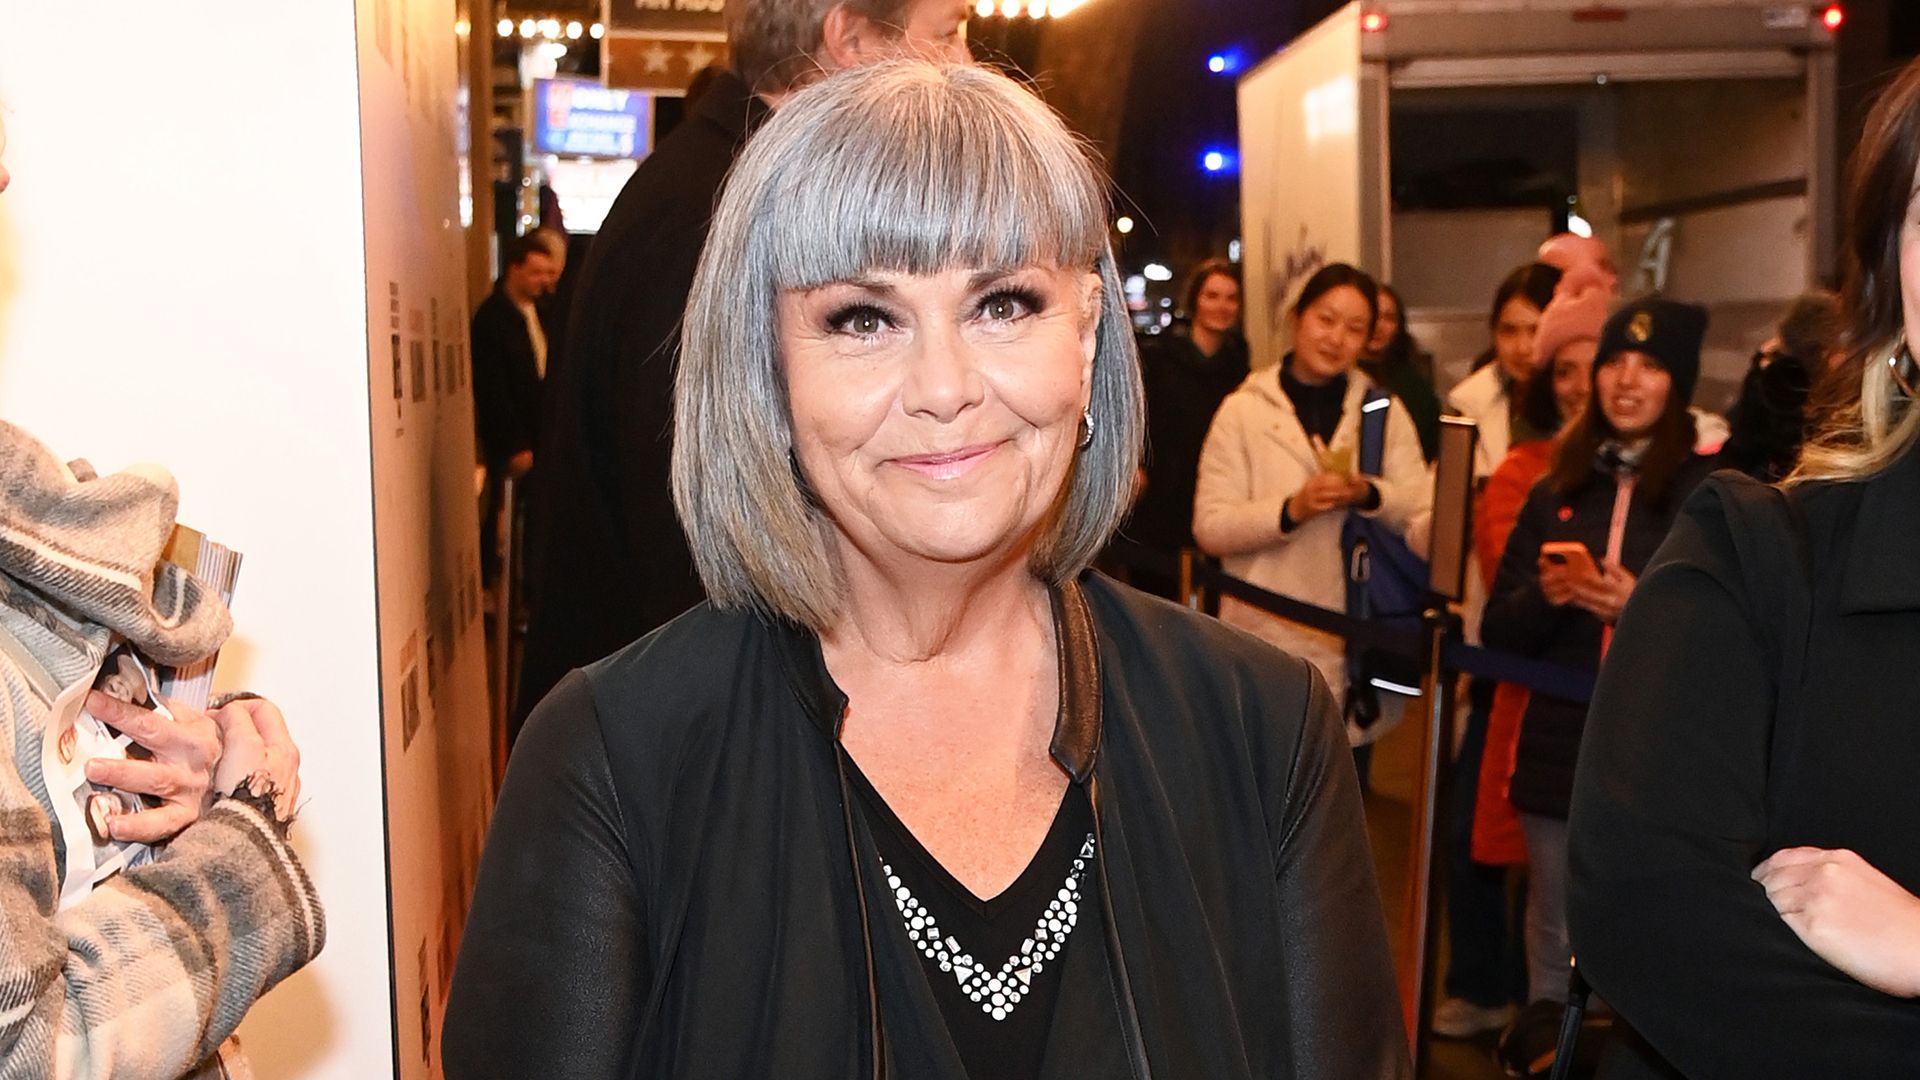 Dawn French looks unrecognisable with platinum hair and daring top